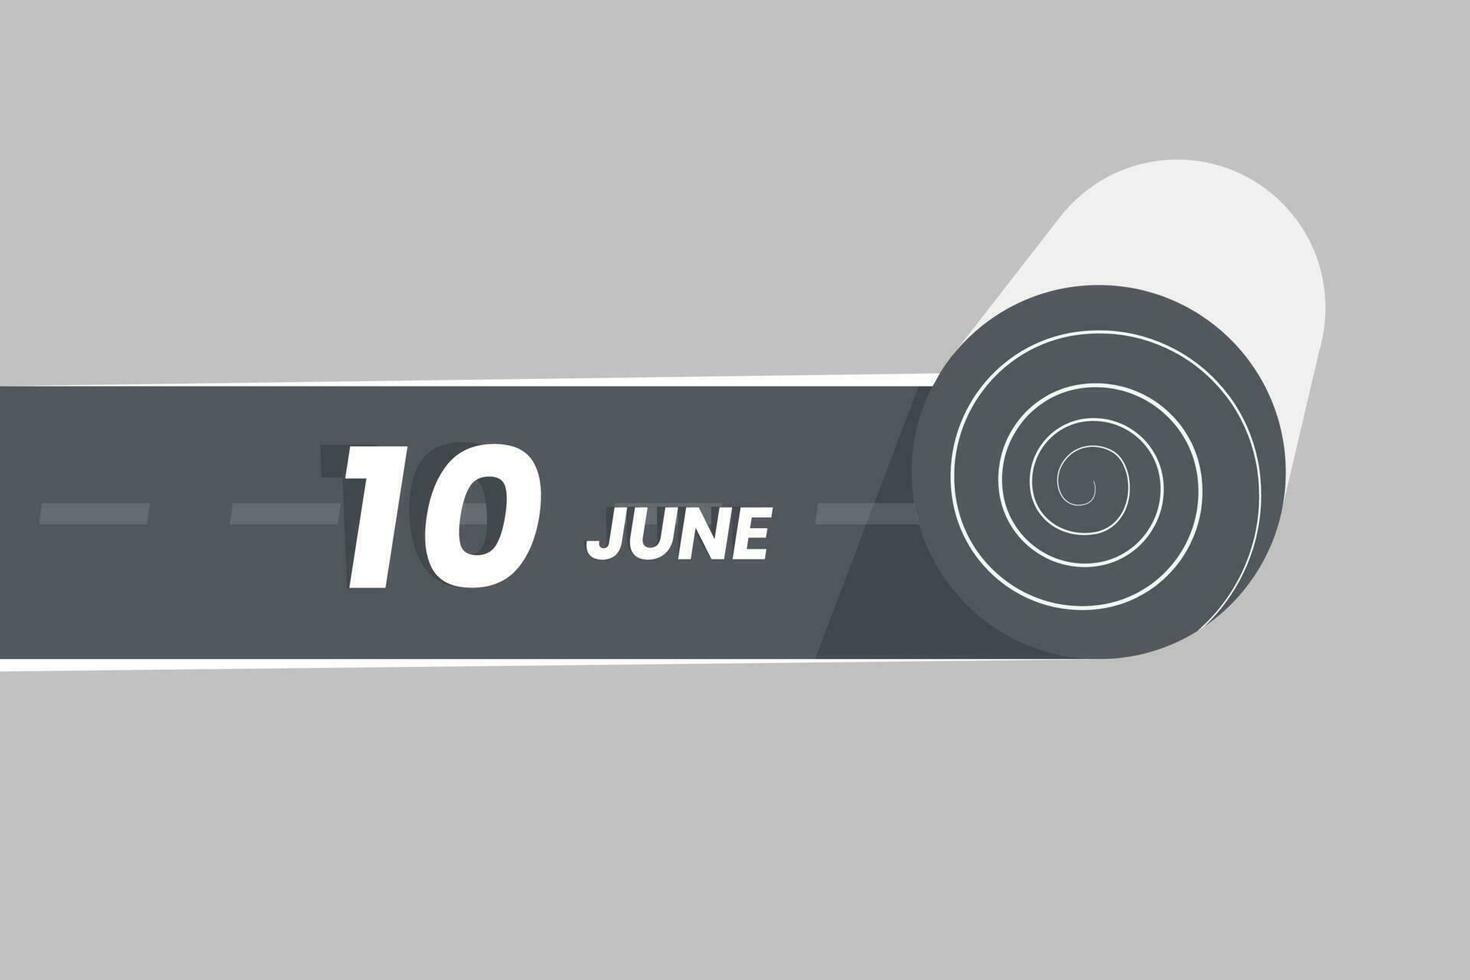 June 10 calendar icon rolling inside the road. 10 June Date Month icon vector illustrator.